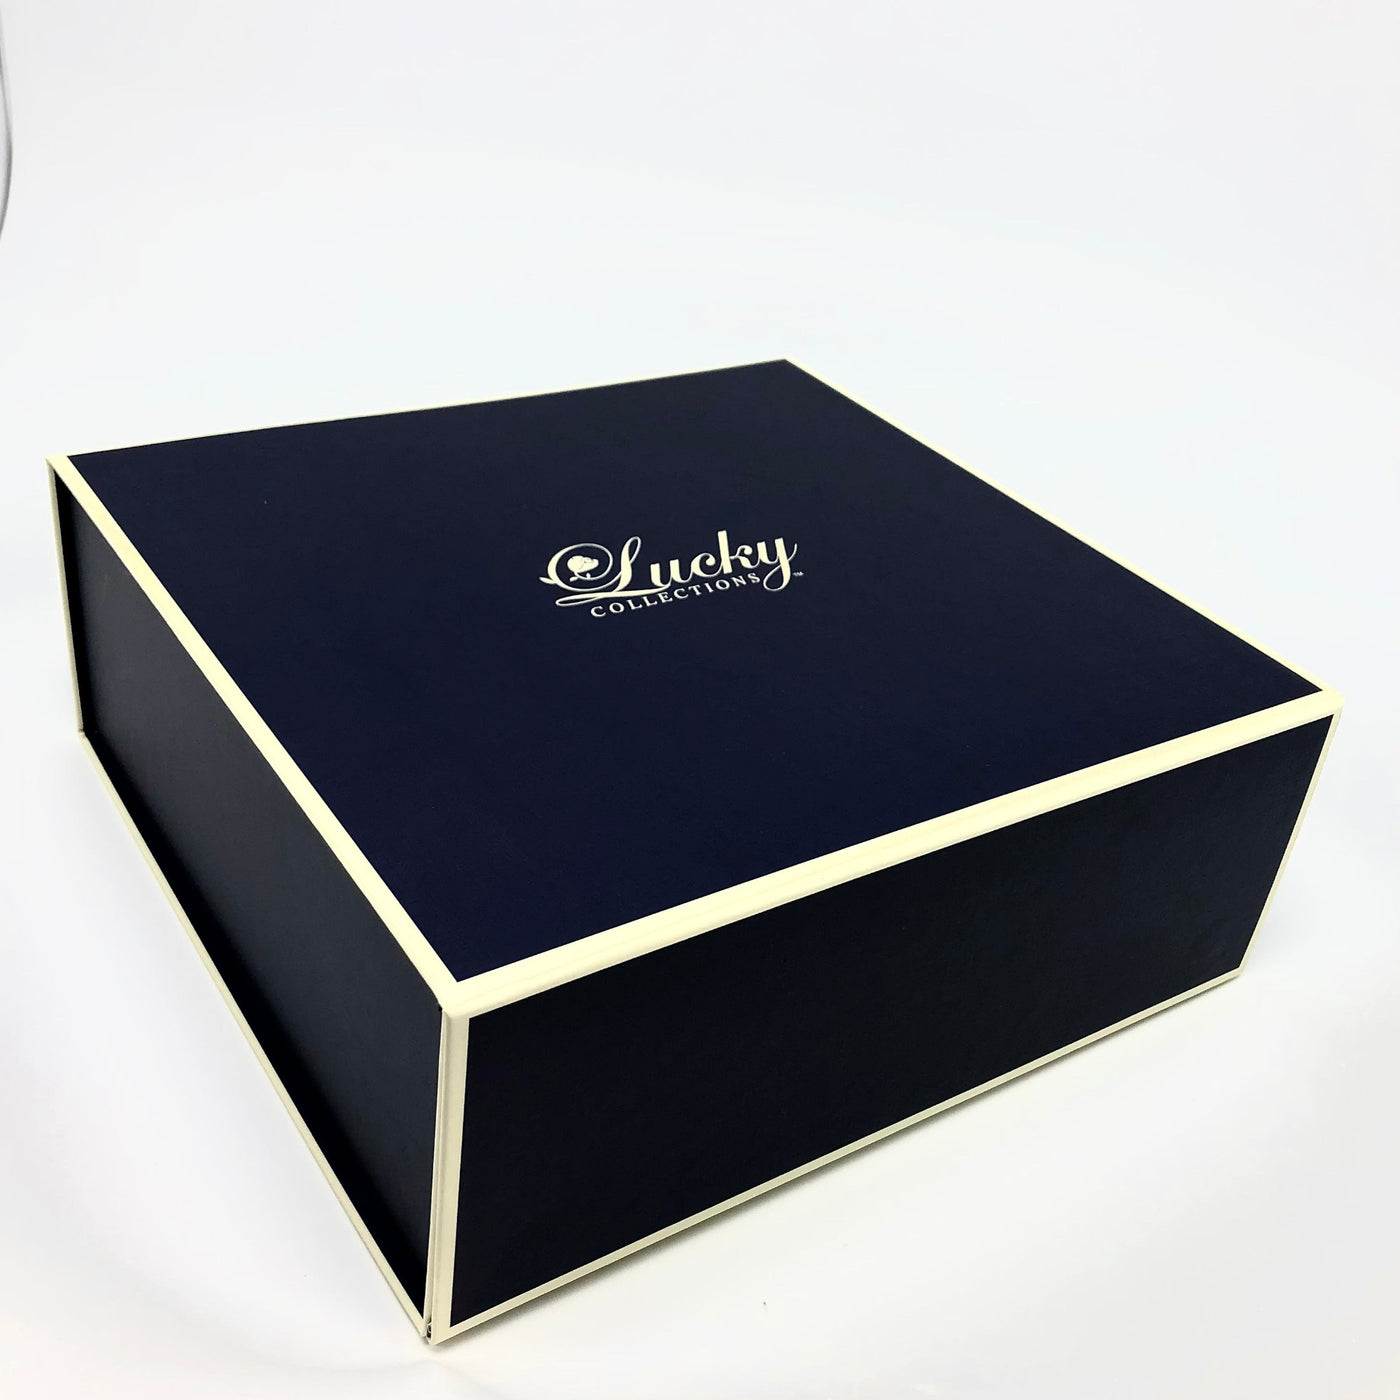 Lucky Collections ™ Tiara come in custom box for convenient presentation and Keepsake